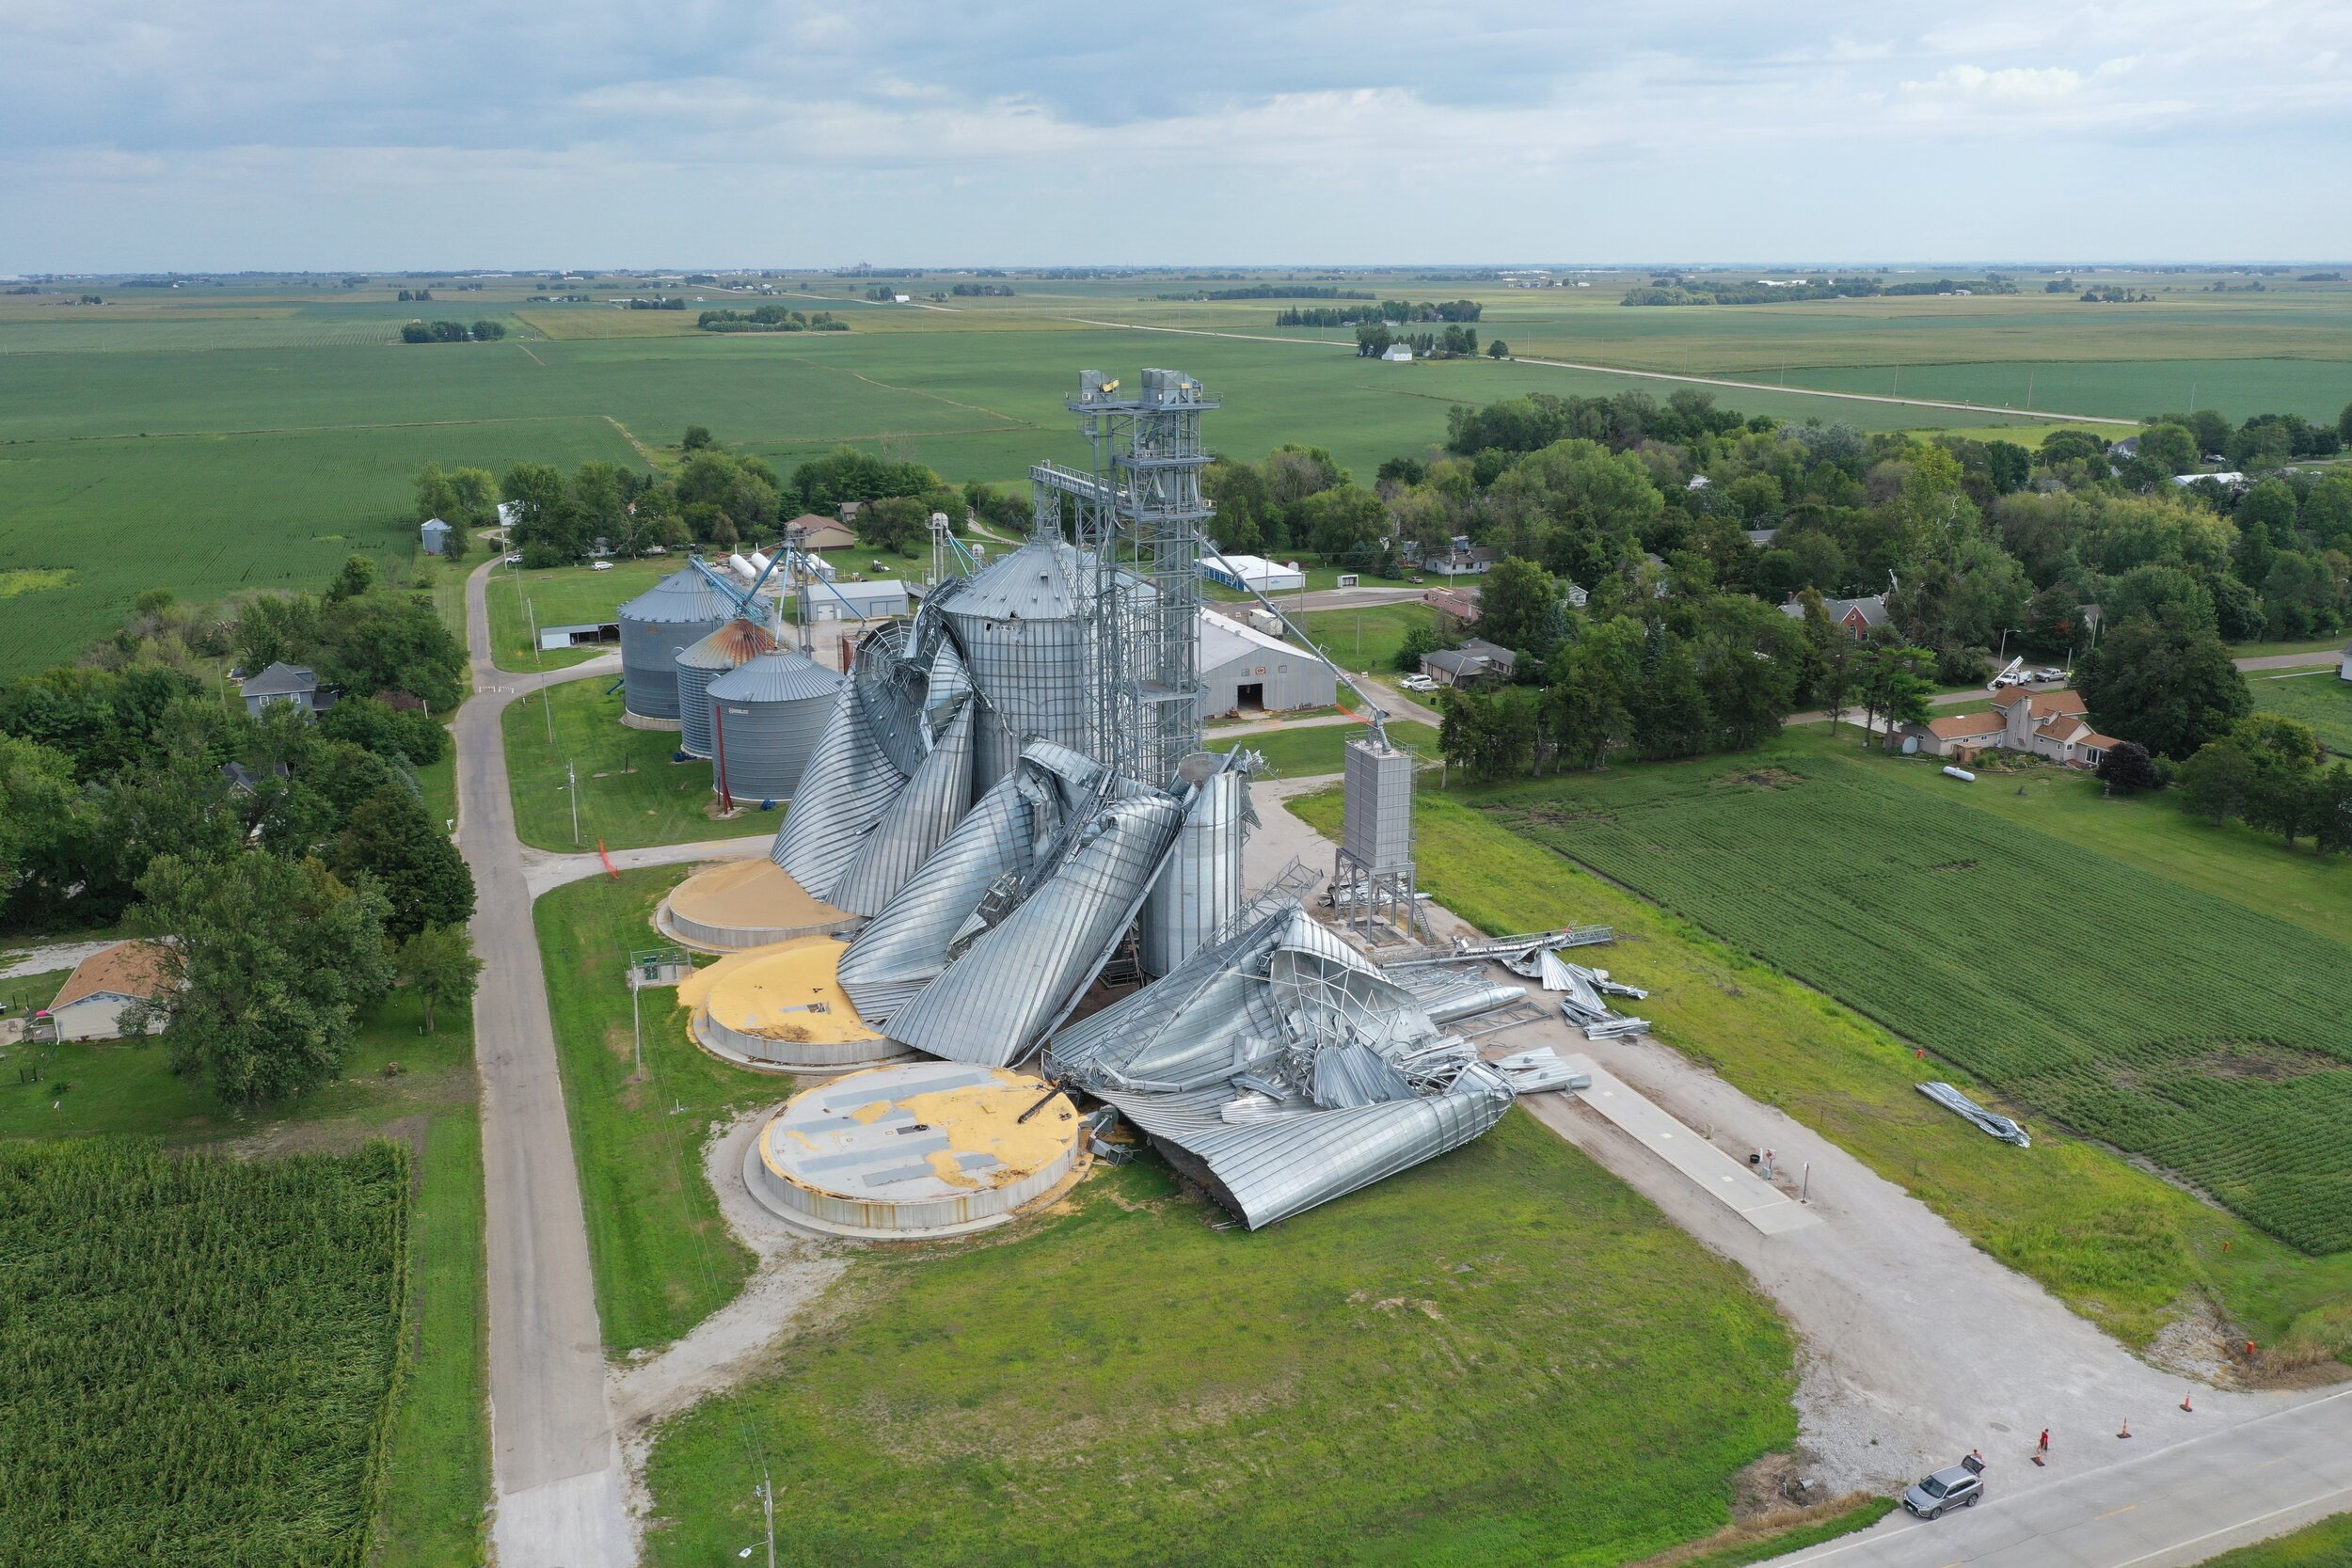  A co-op in Luther received significant damage to its grain storage facility after the August 10 derecho. 